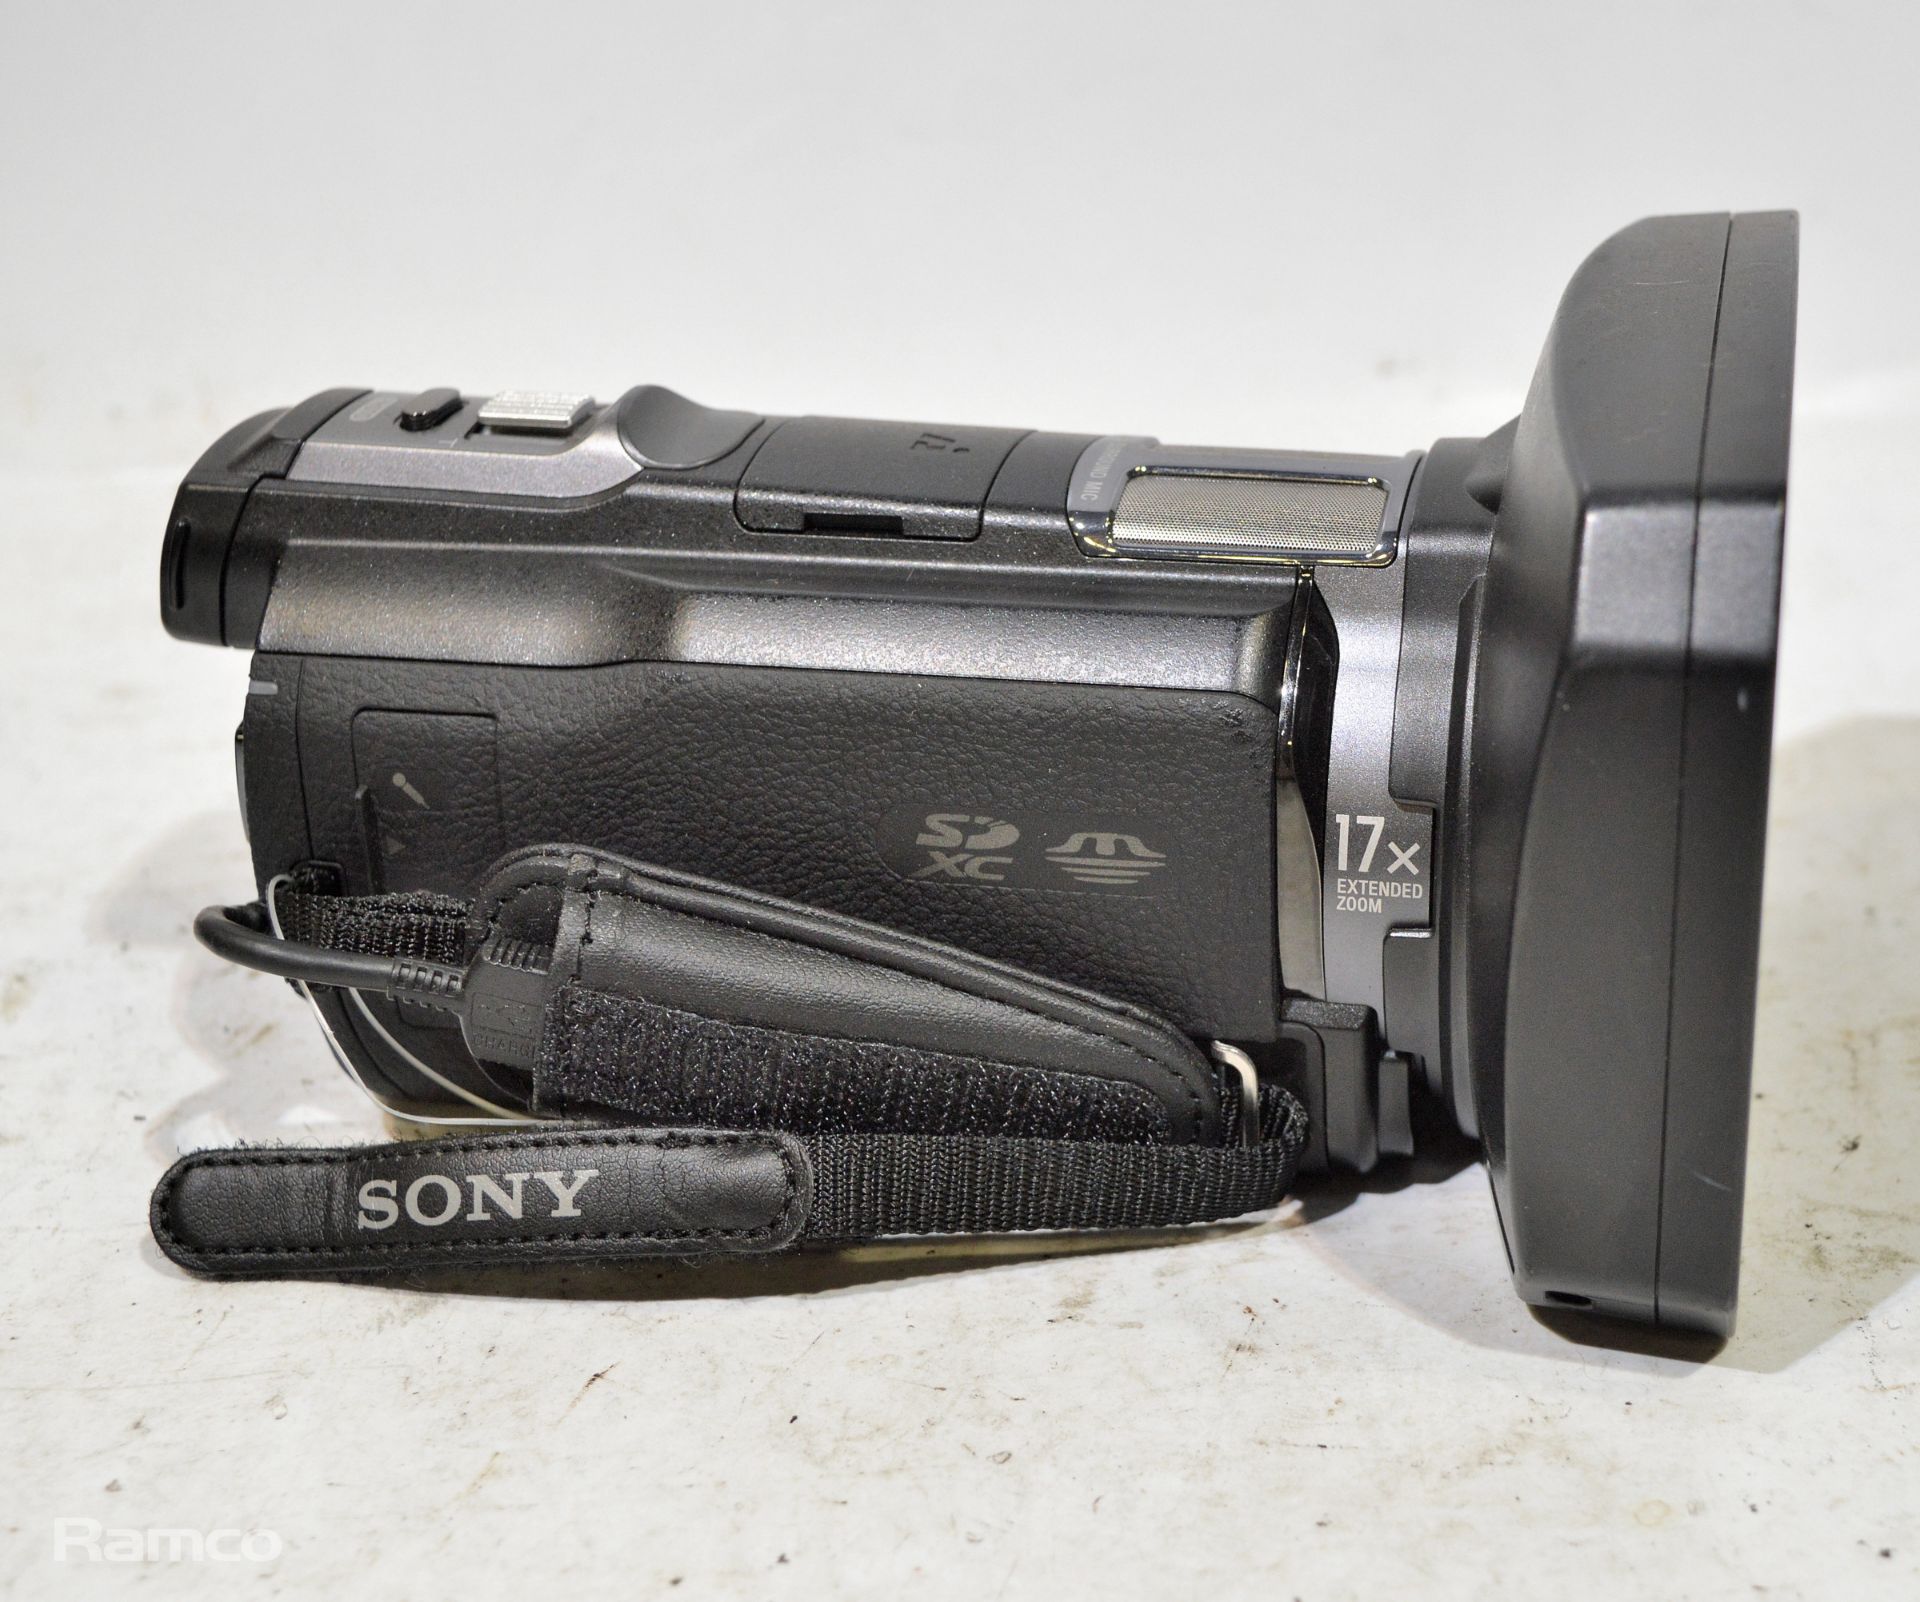 3x Sony HDR-CX730 Handycams 24.1megapixel - Image 4 of 8